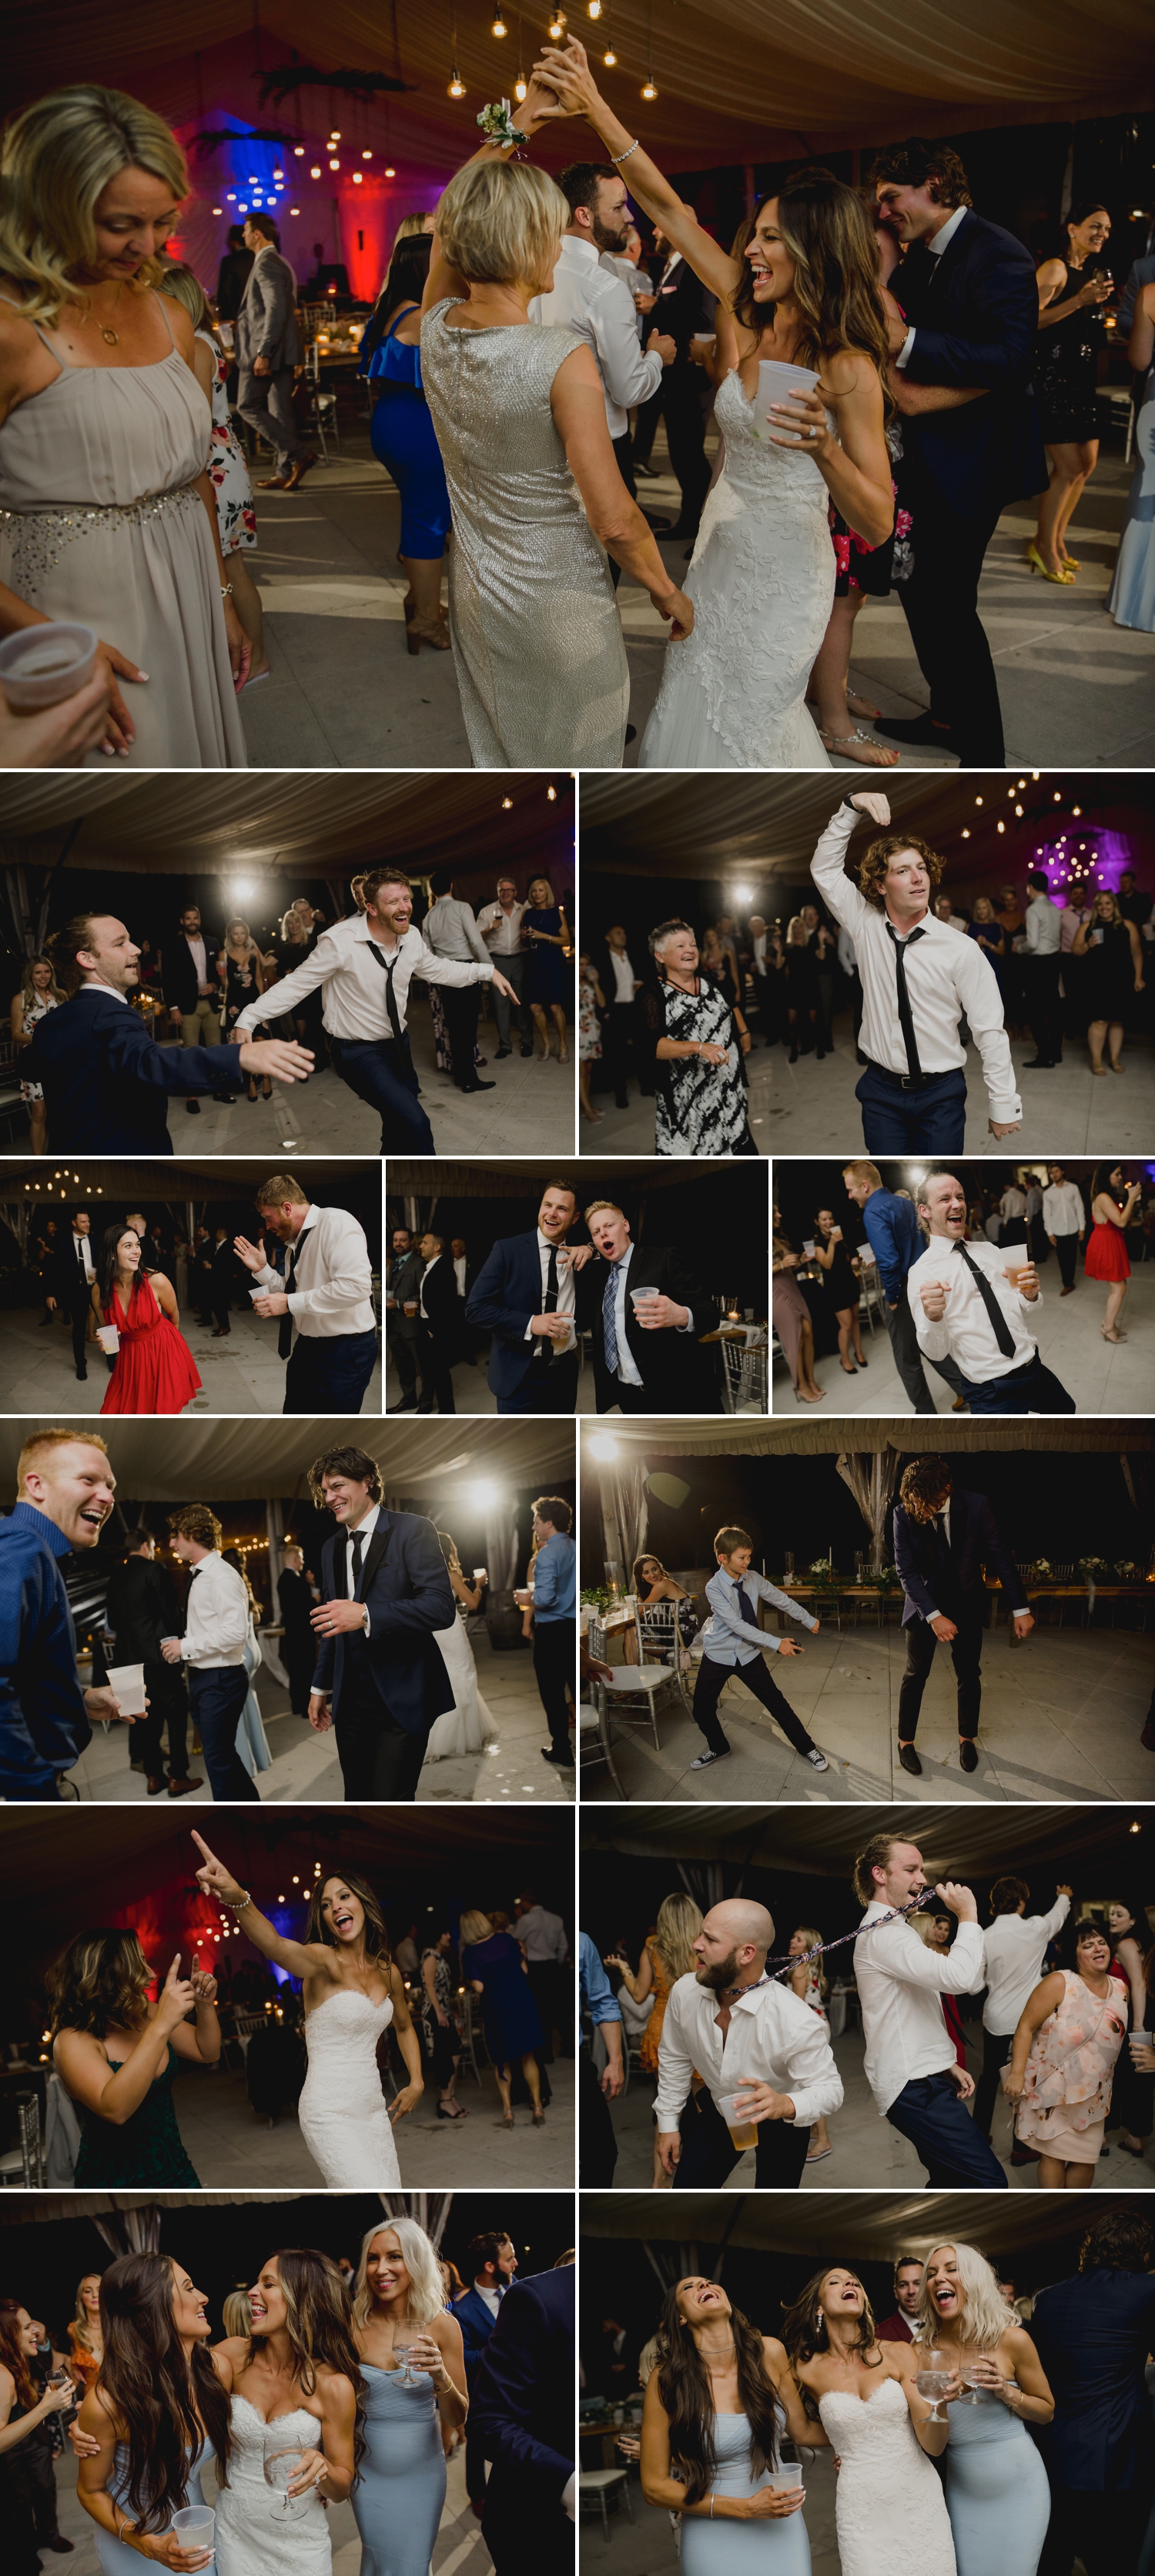 photos of candid moments on the dance floor during a wedding reception at the ravine vineyard in niagara on the lake ontario